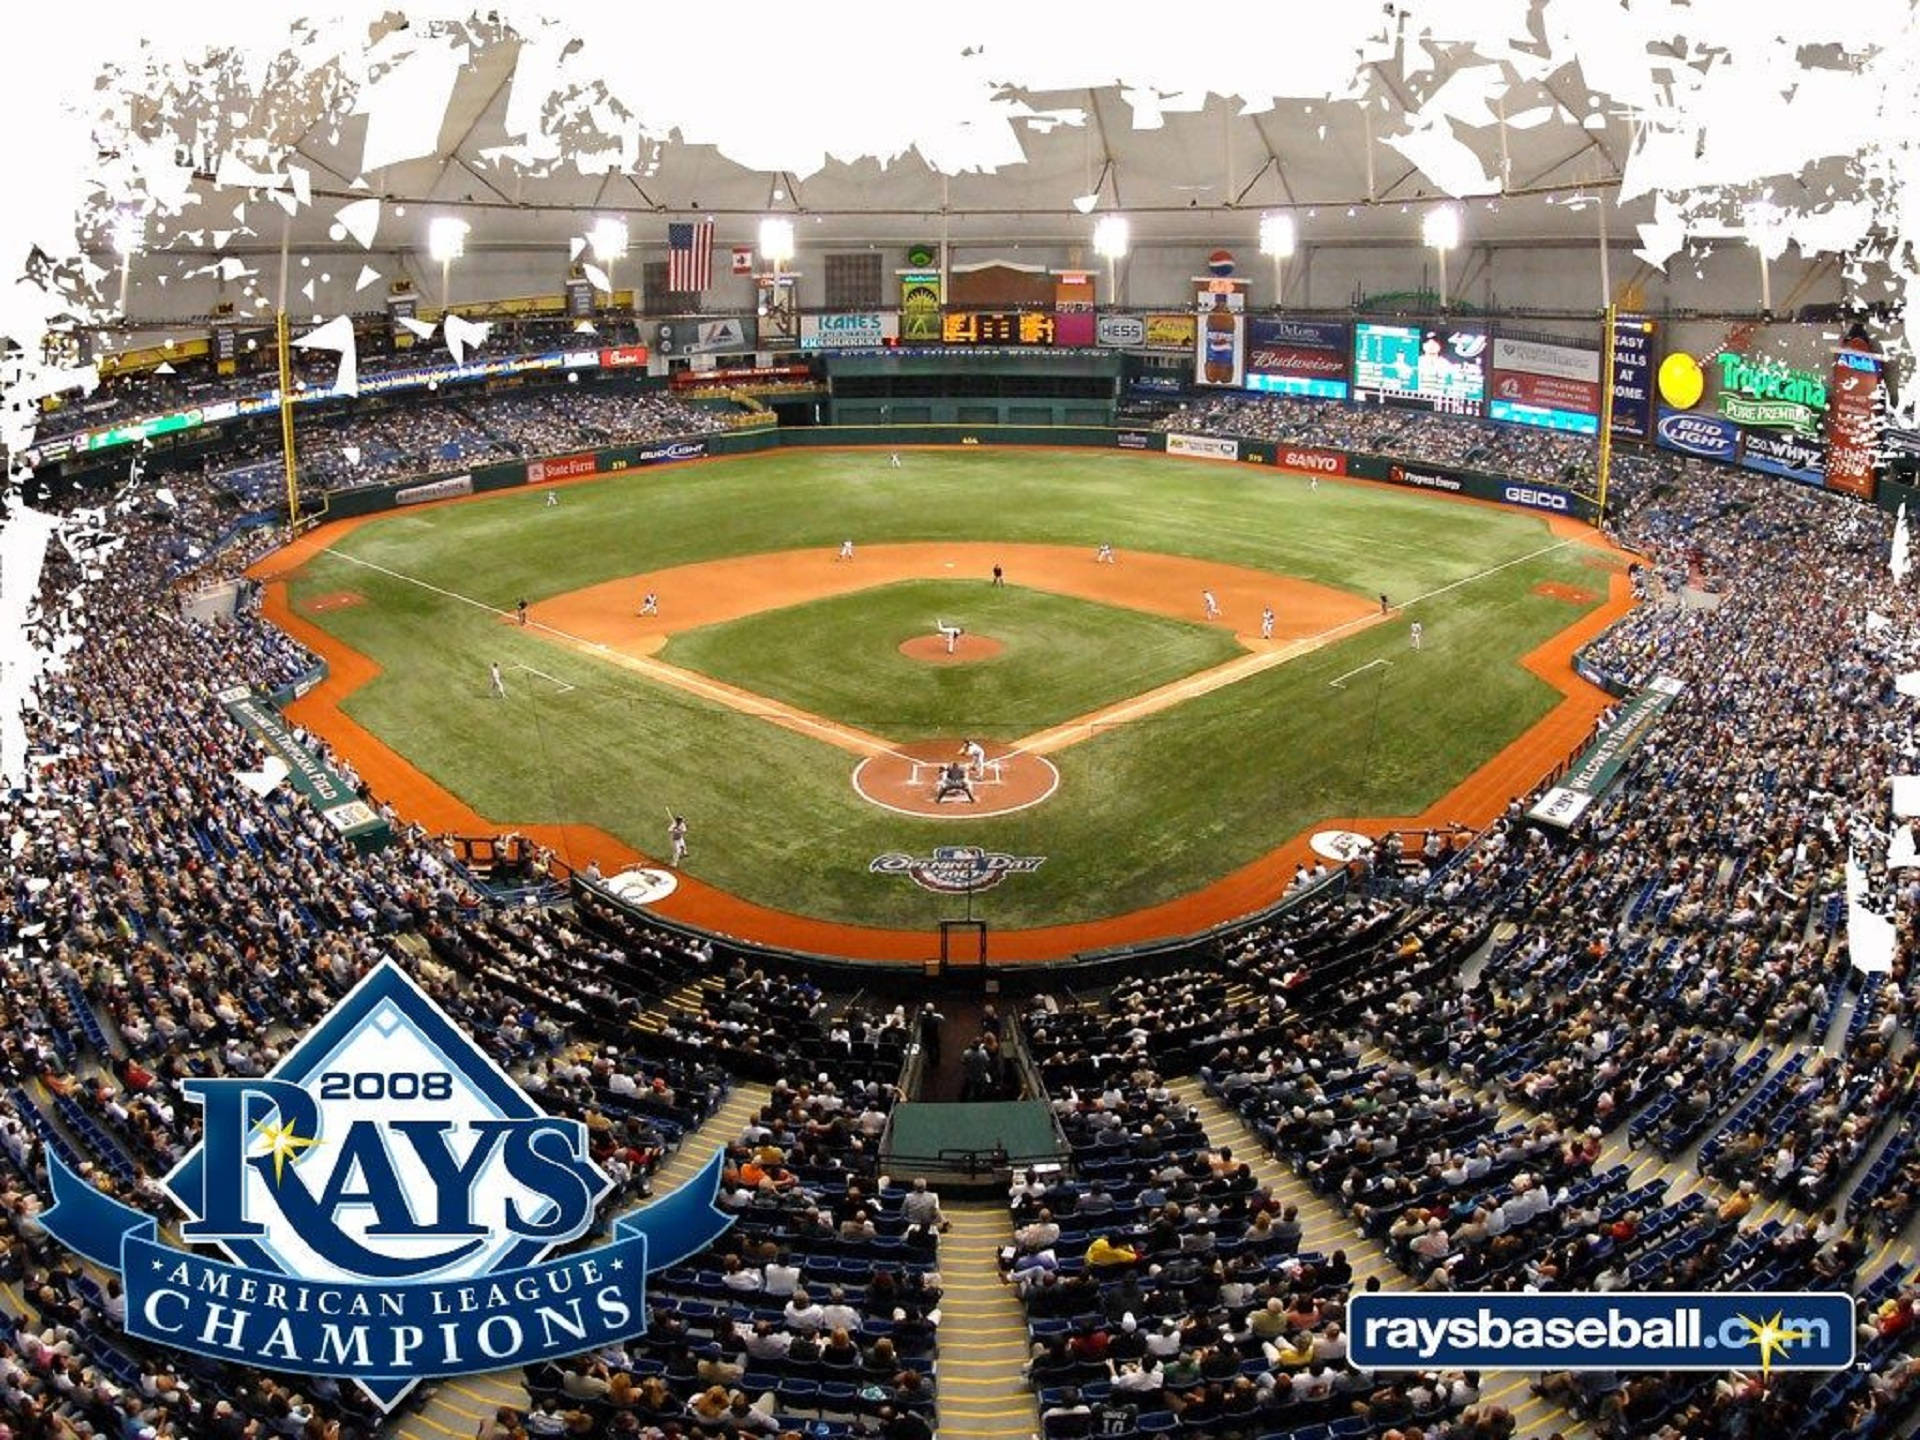 Tampa Bay Rays League Champion Poster Wallpaper